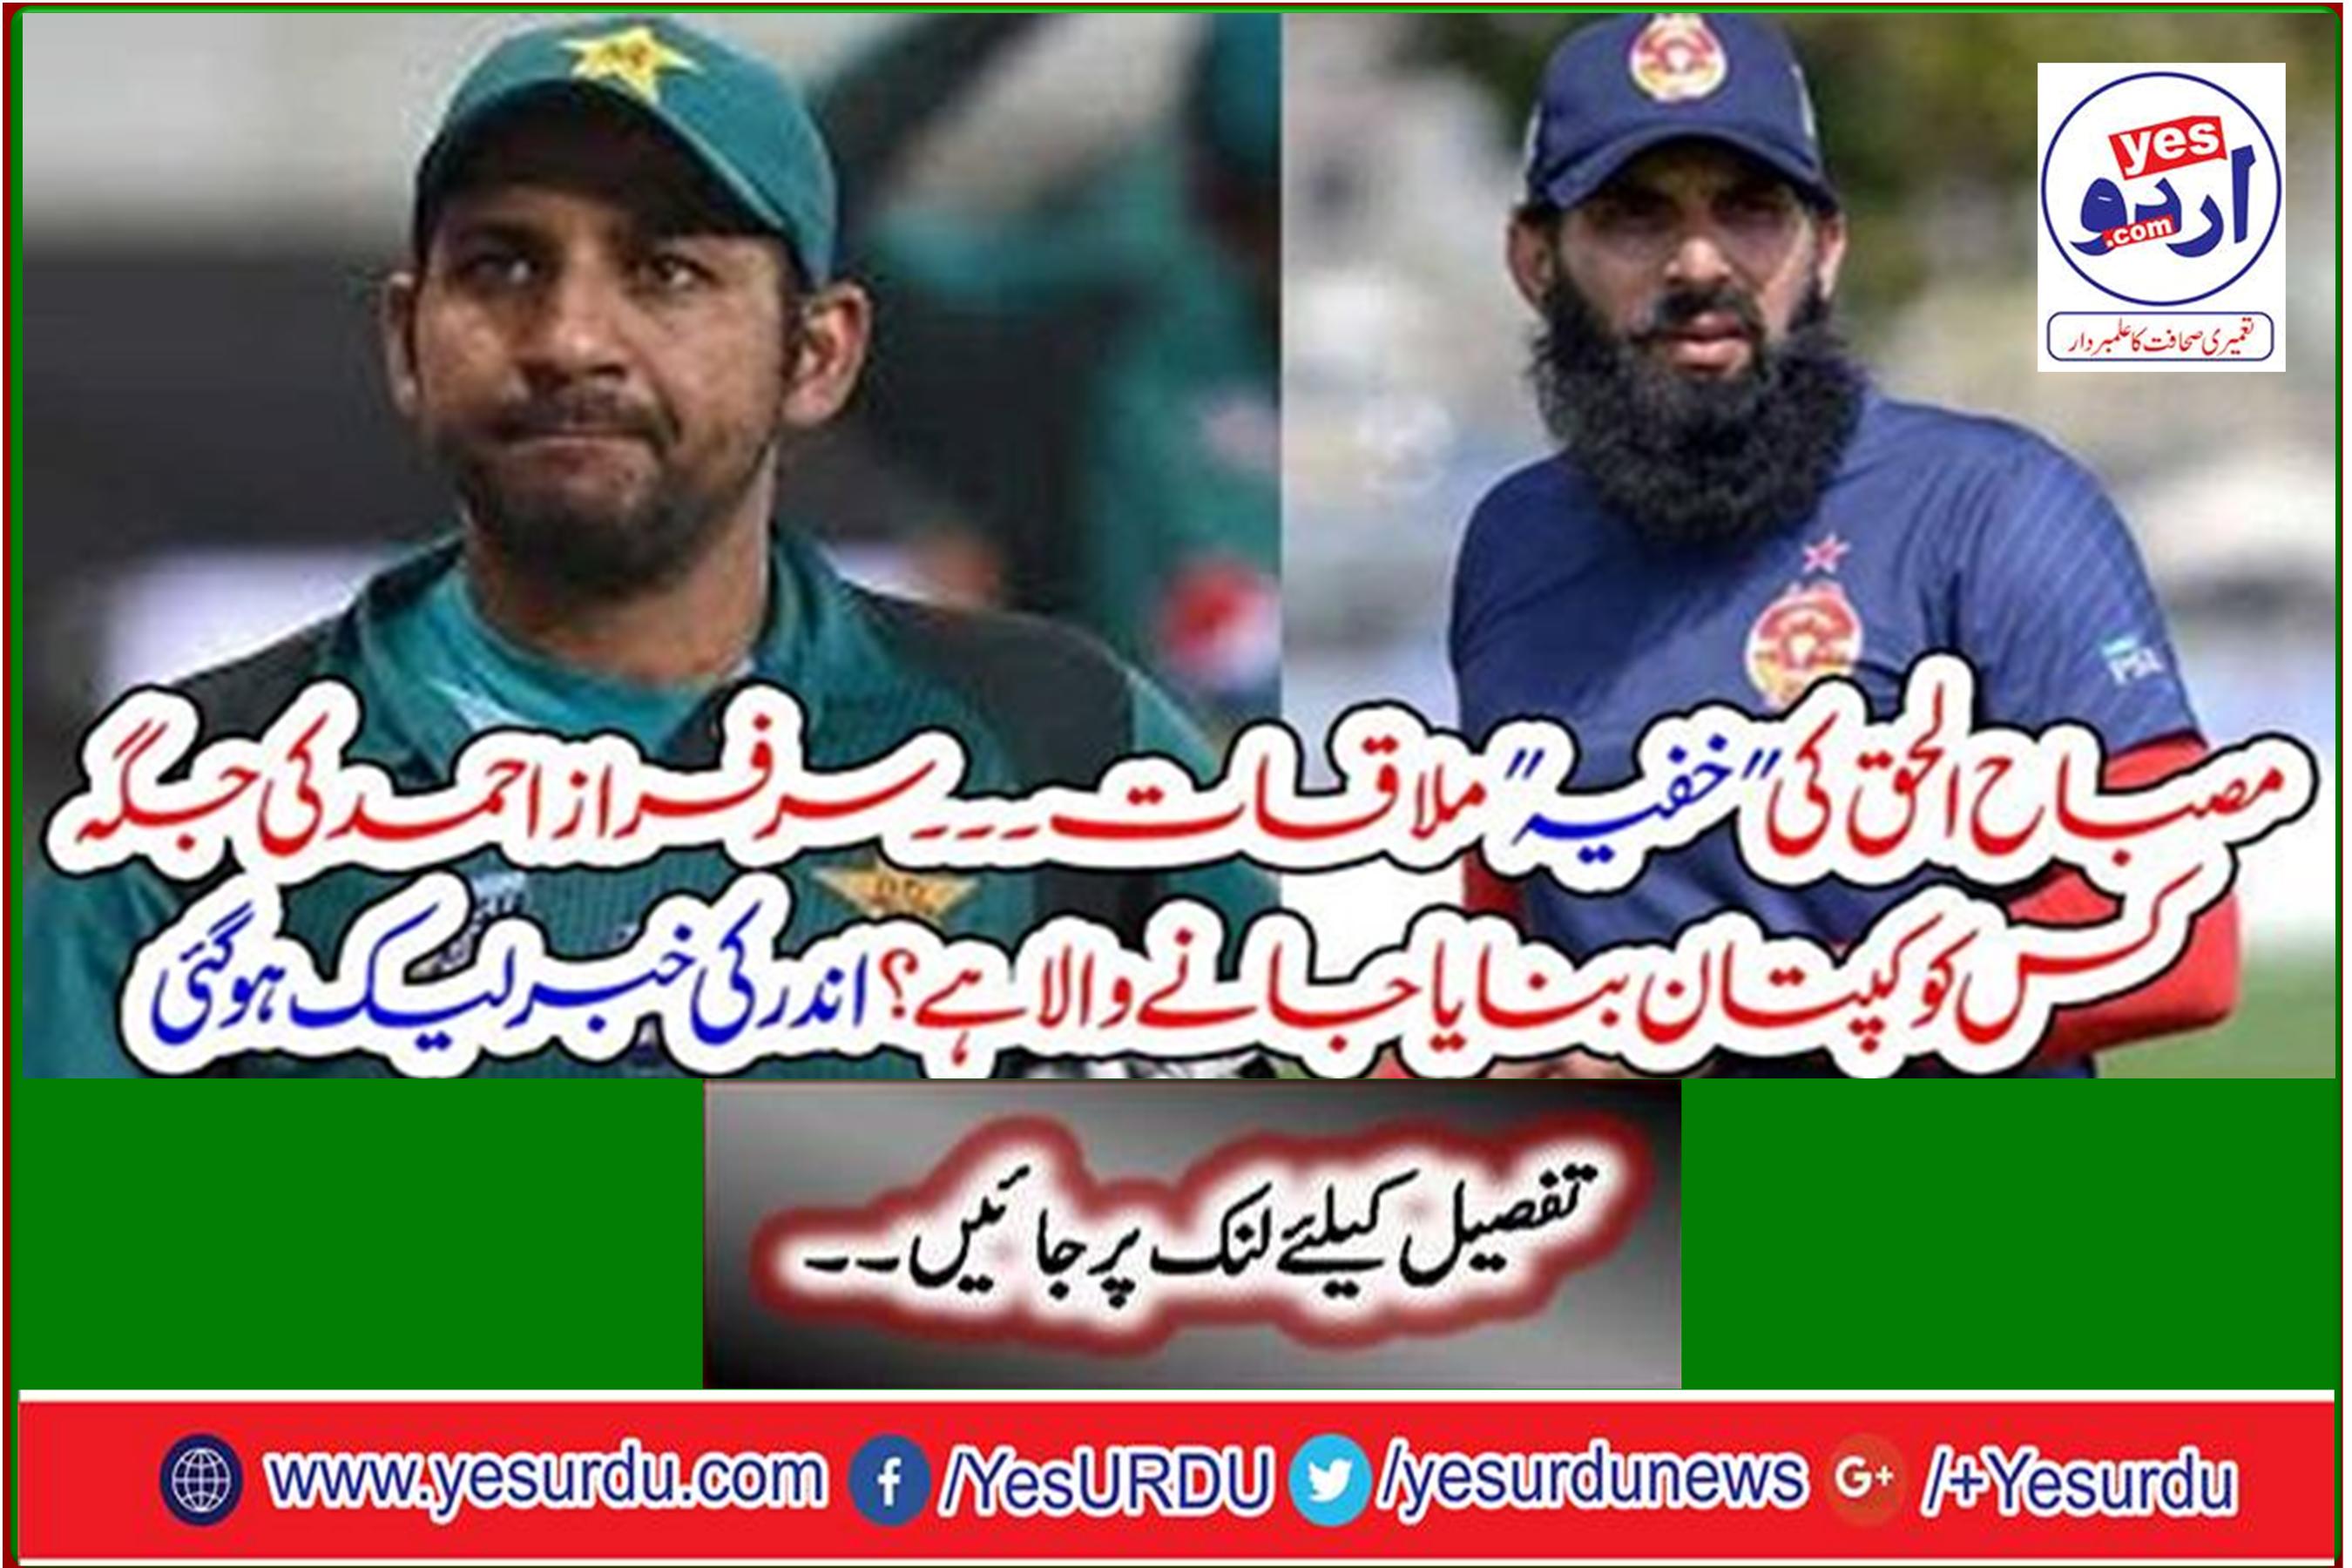 Misbah-ul-Haq's "secret" meeting ... Who is the captain to replace Sarfraz Ahmed? Inside news leaked